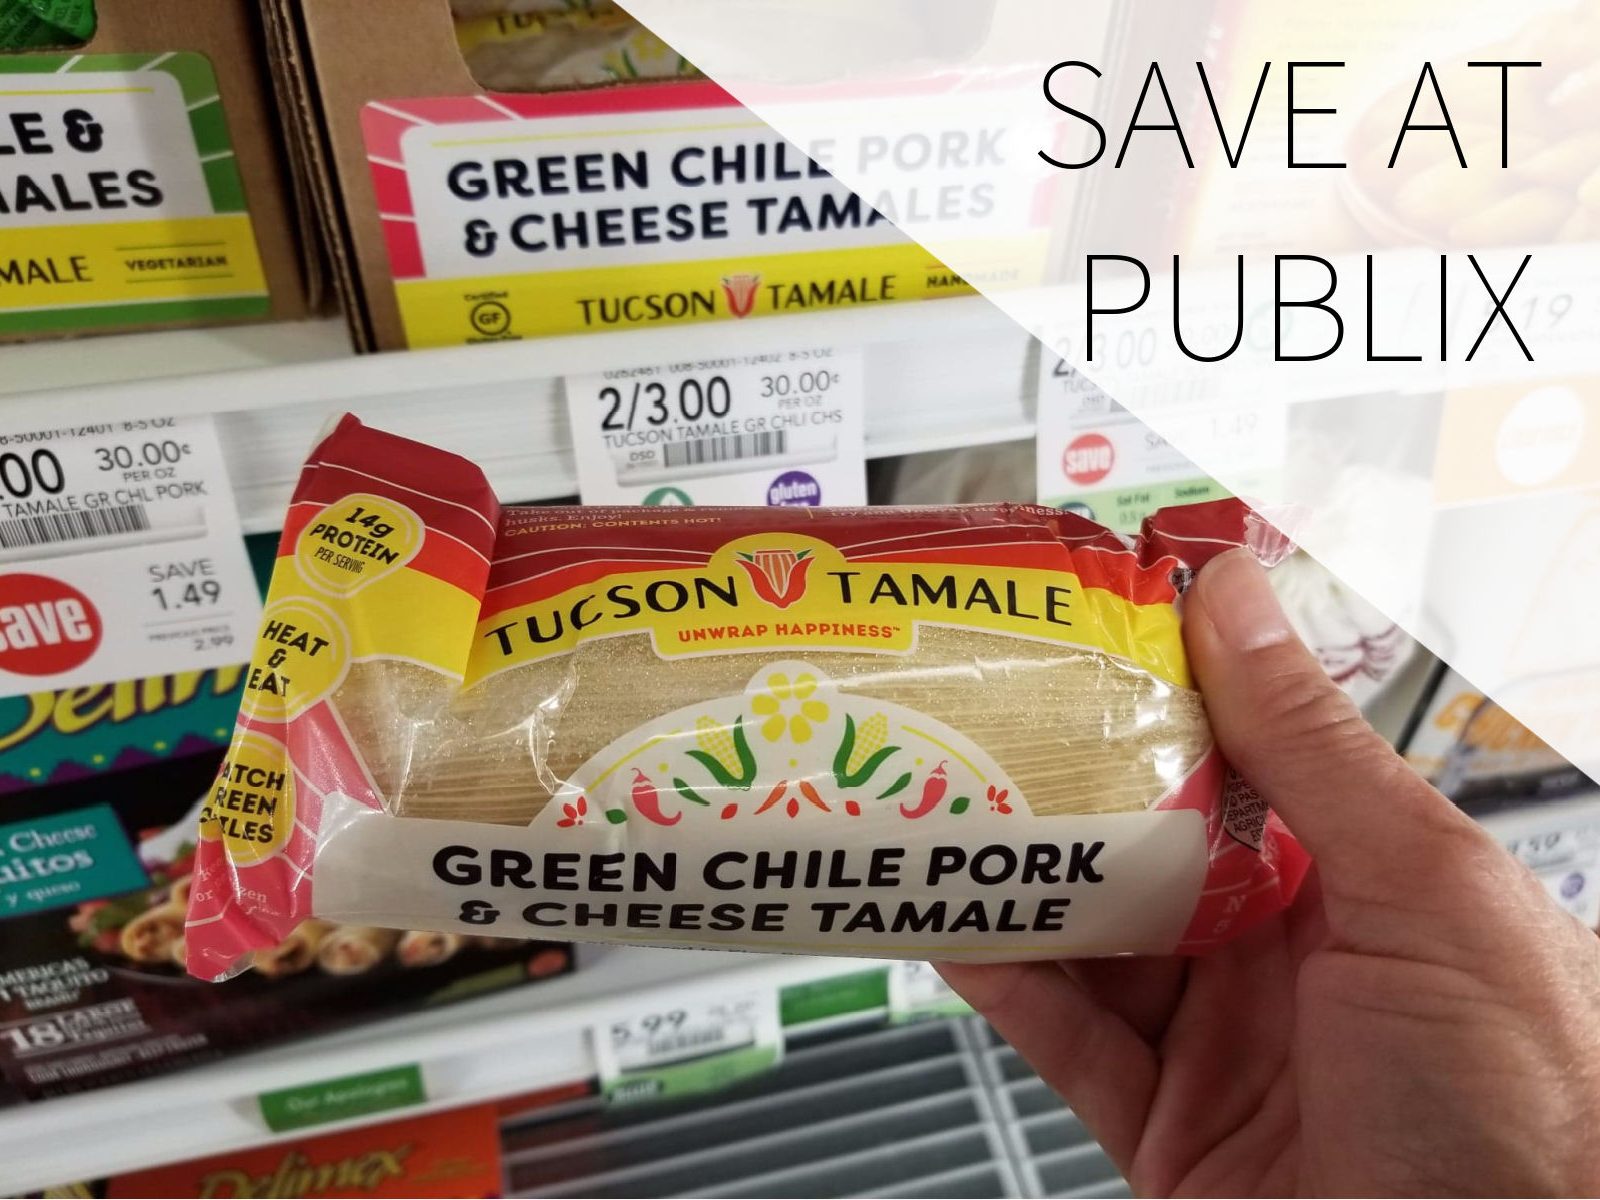 Delicious Tucson Tamales Are On Sale NOW At Select Publix Locations – Half The Regular Price!